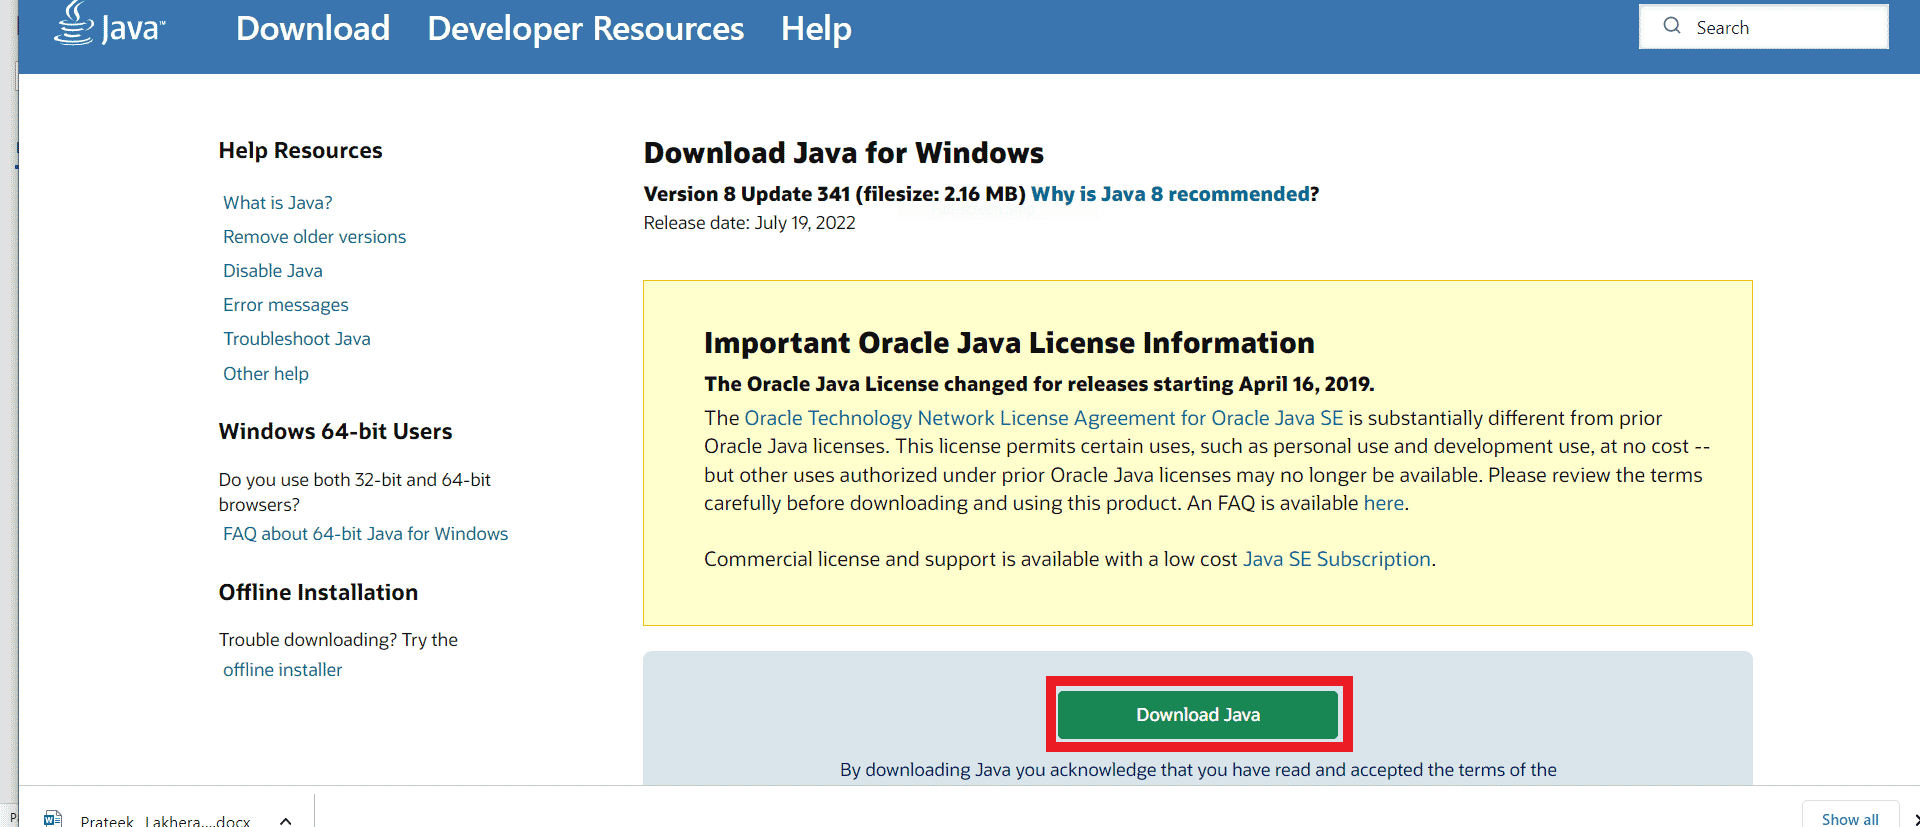 click on Download java. Fix Exit Code 0 Minecraft on Windows 10